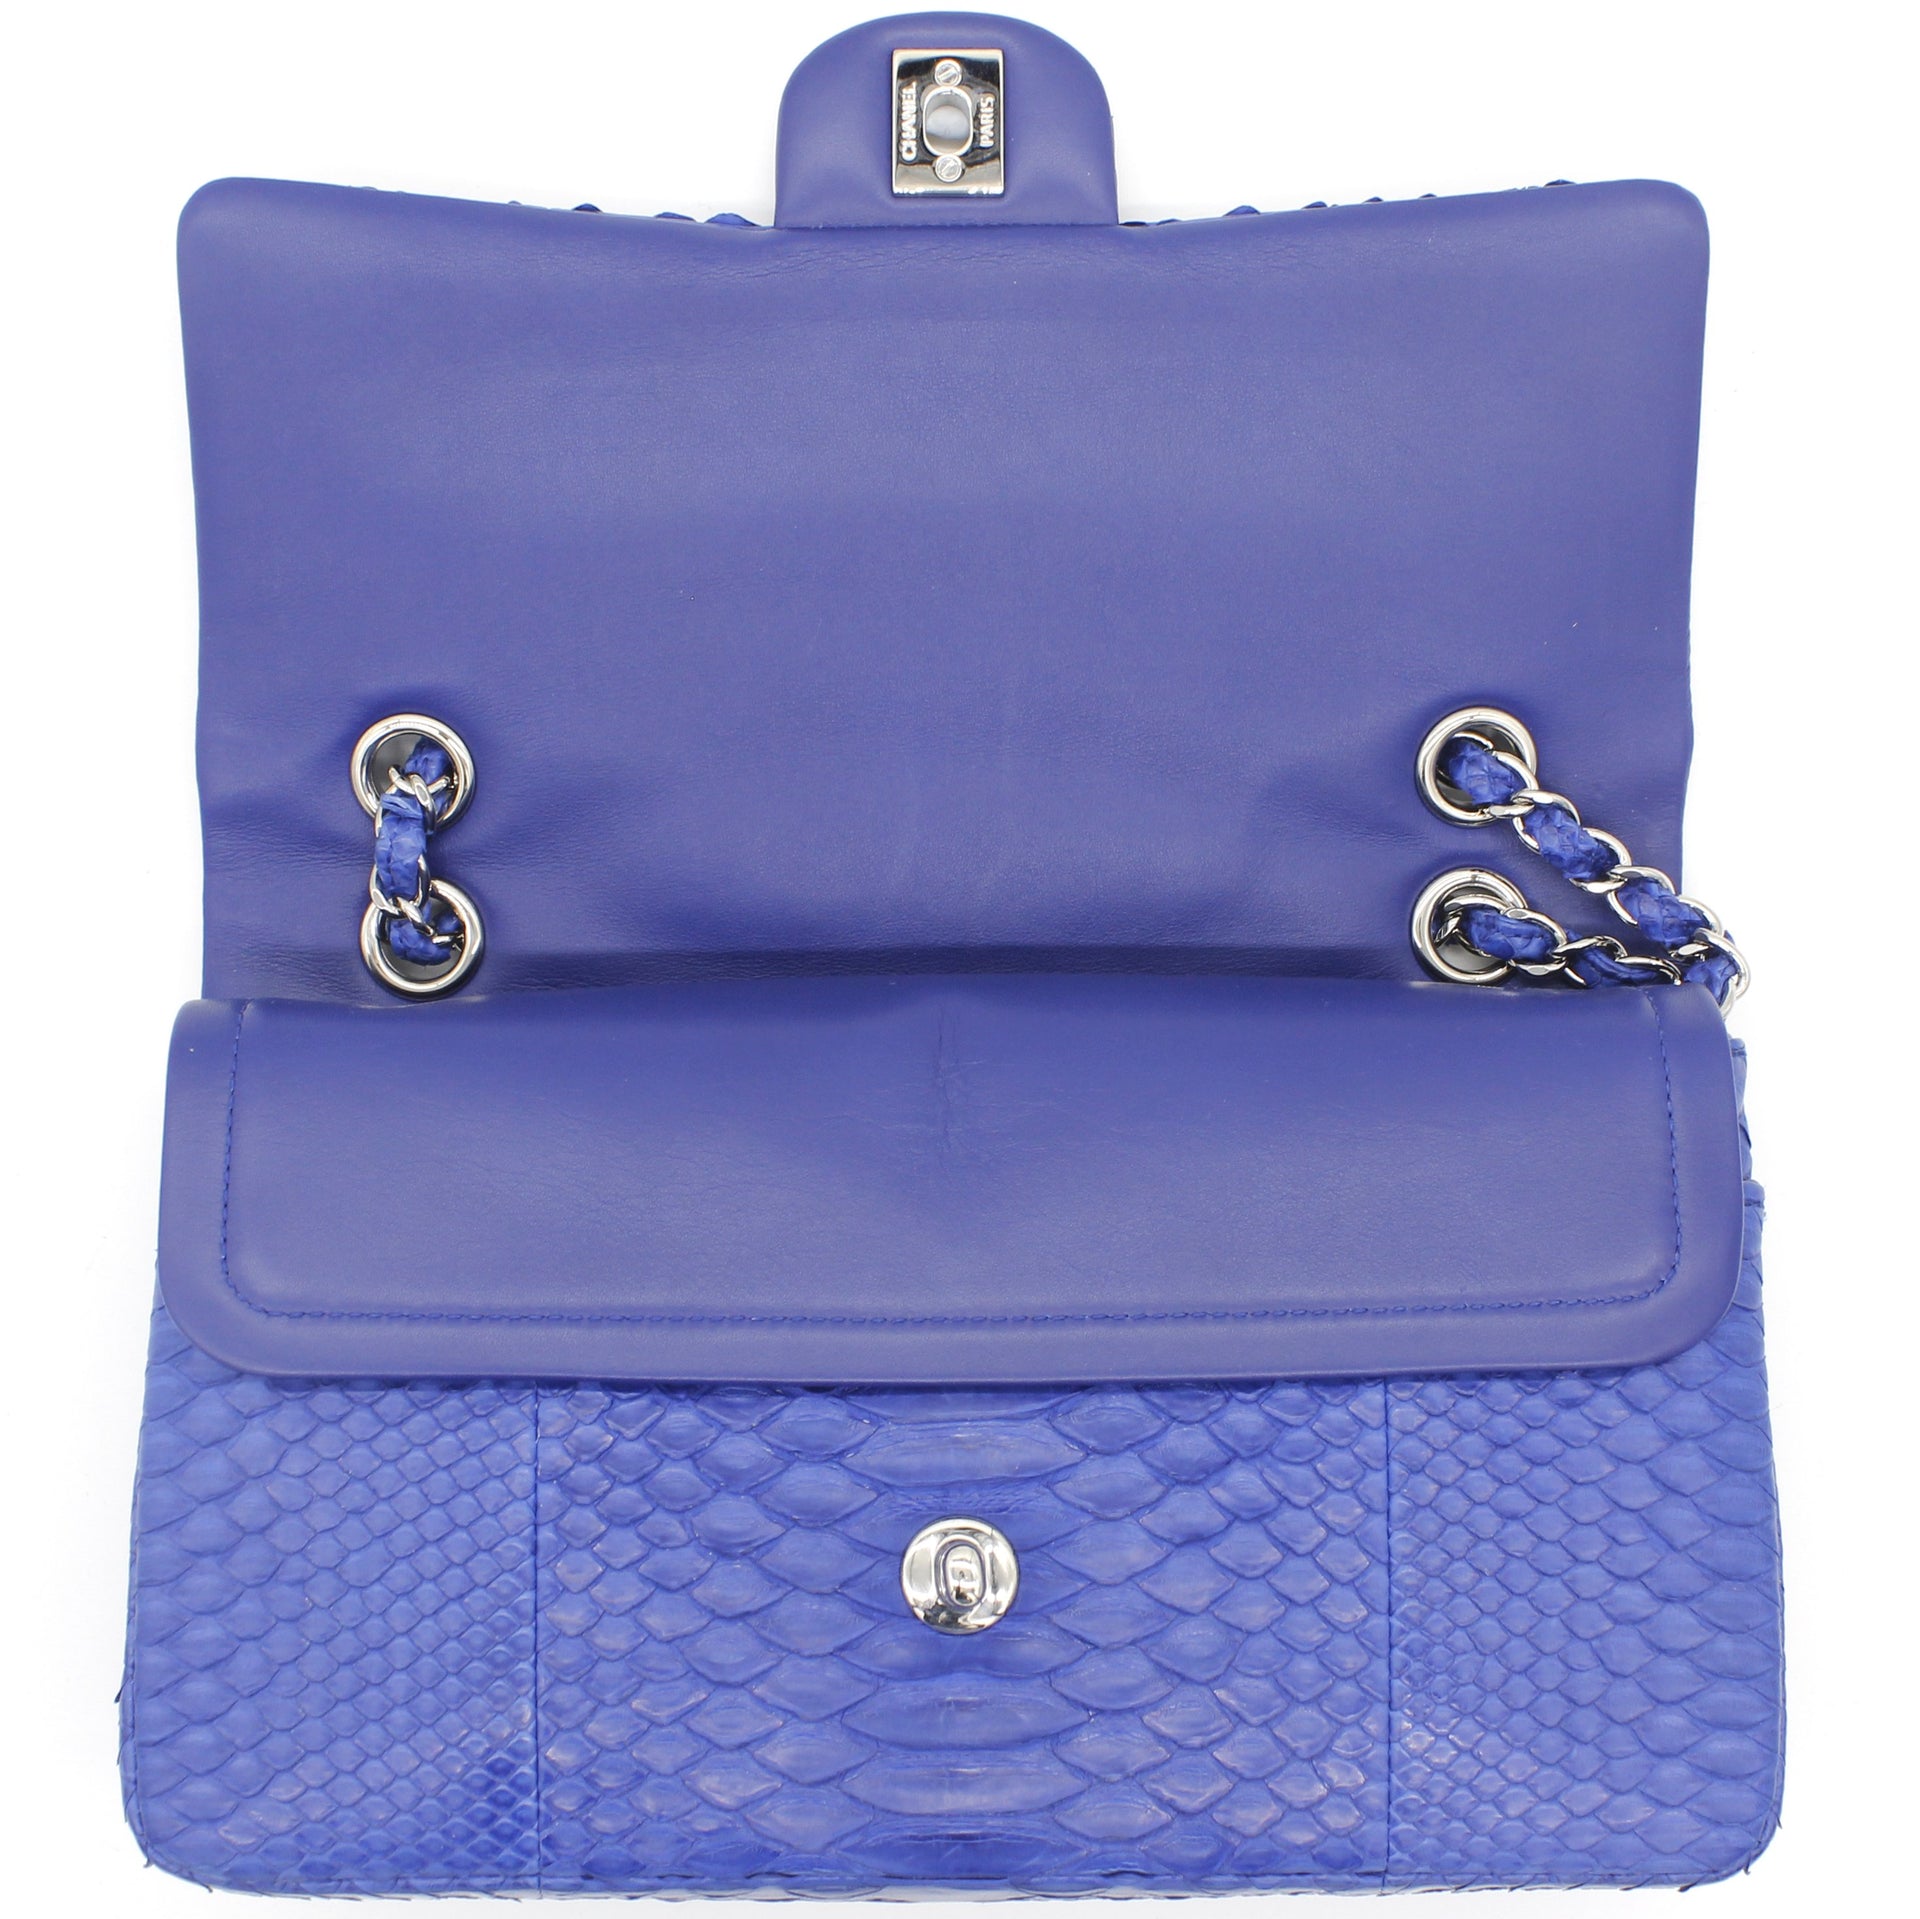 Blue Snack Leather Classic Double Flap Bag